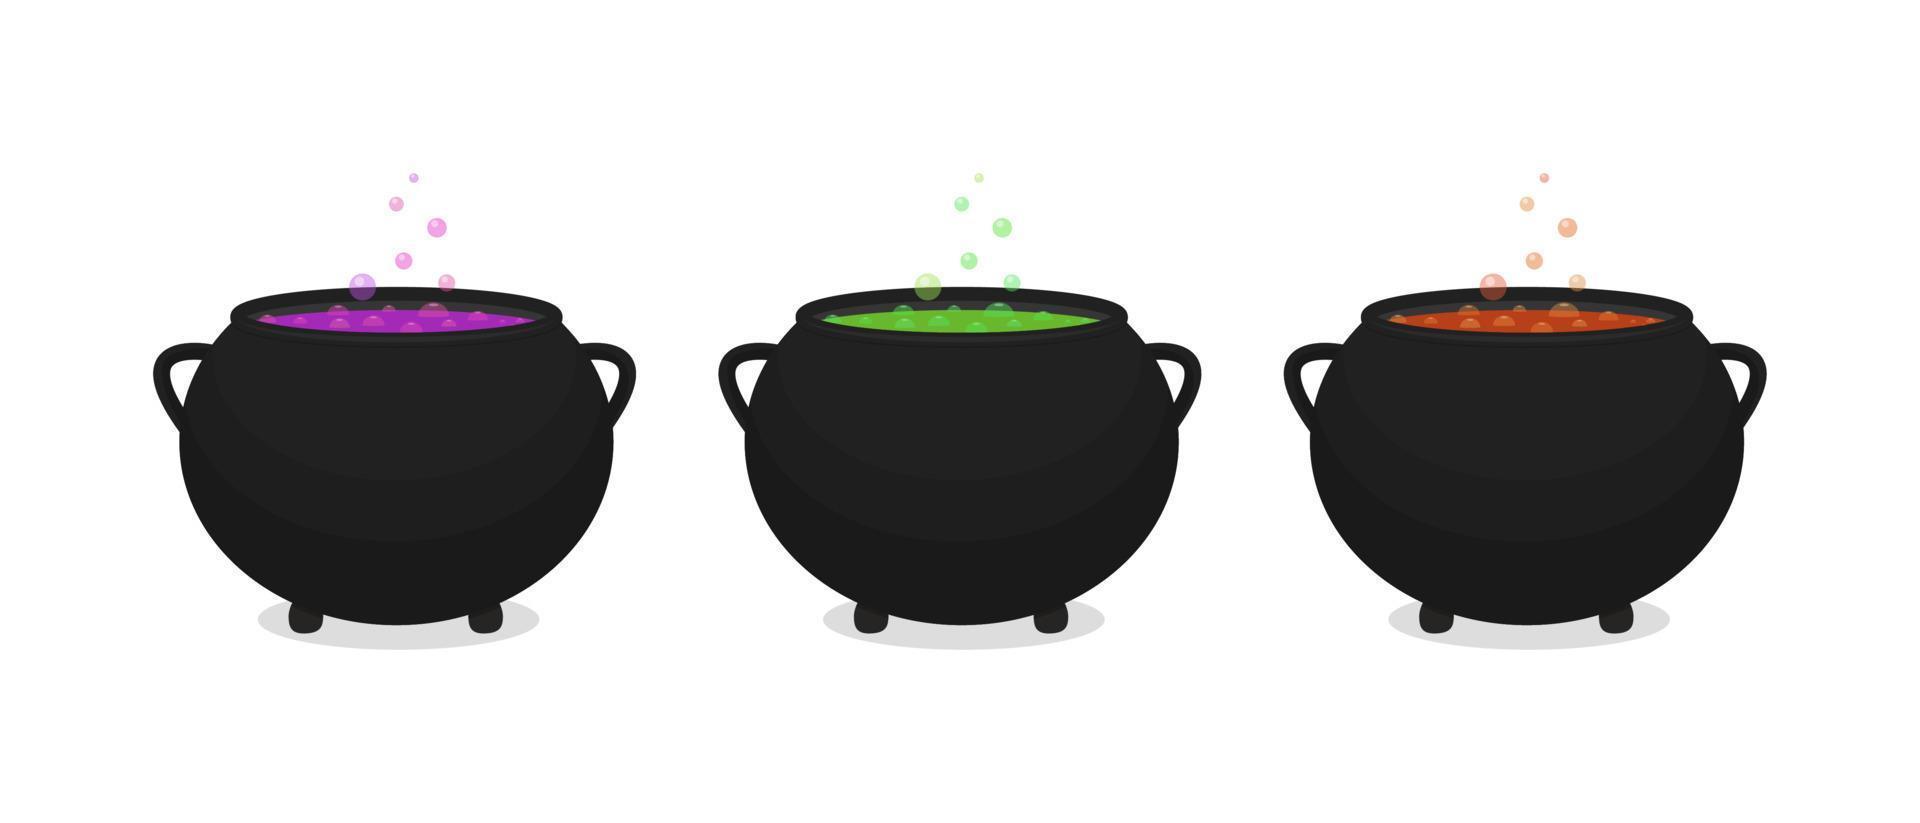 Witch cauldrons with bubbling potion set. Halloween illustrated elemets. vector